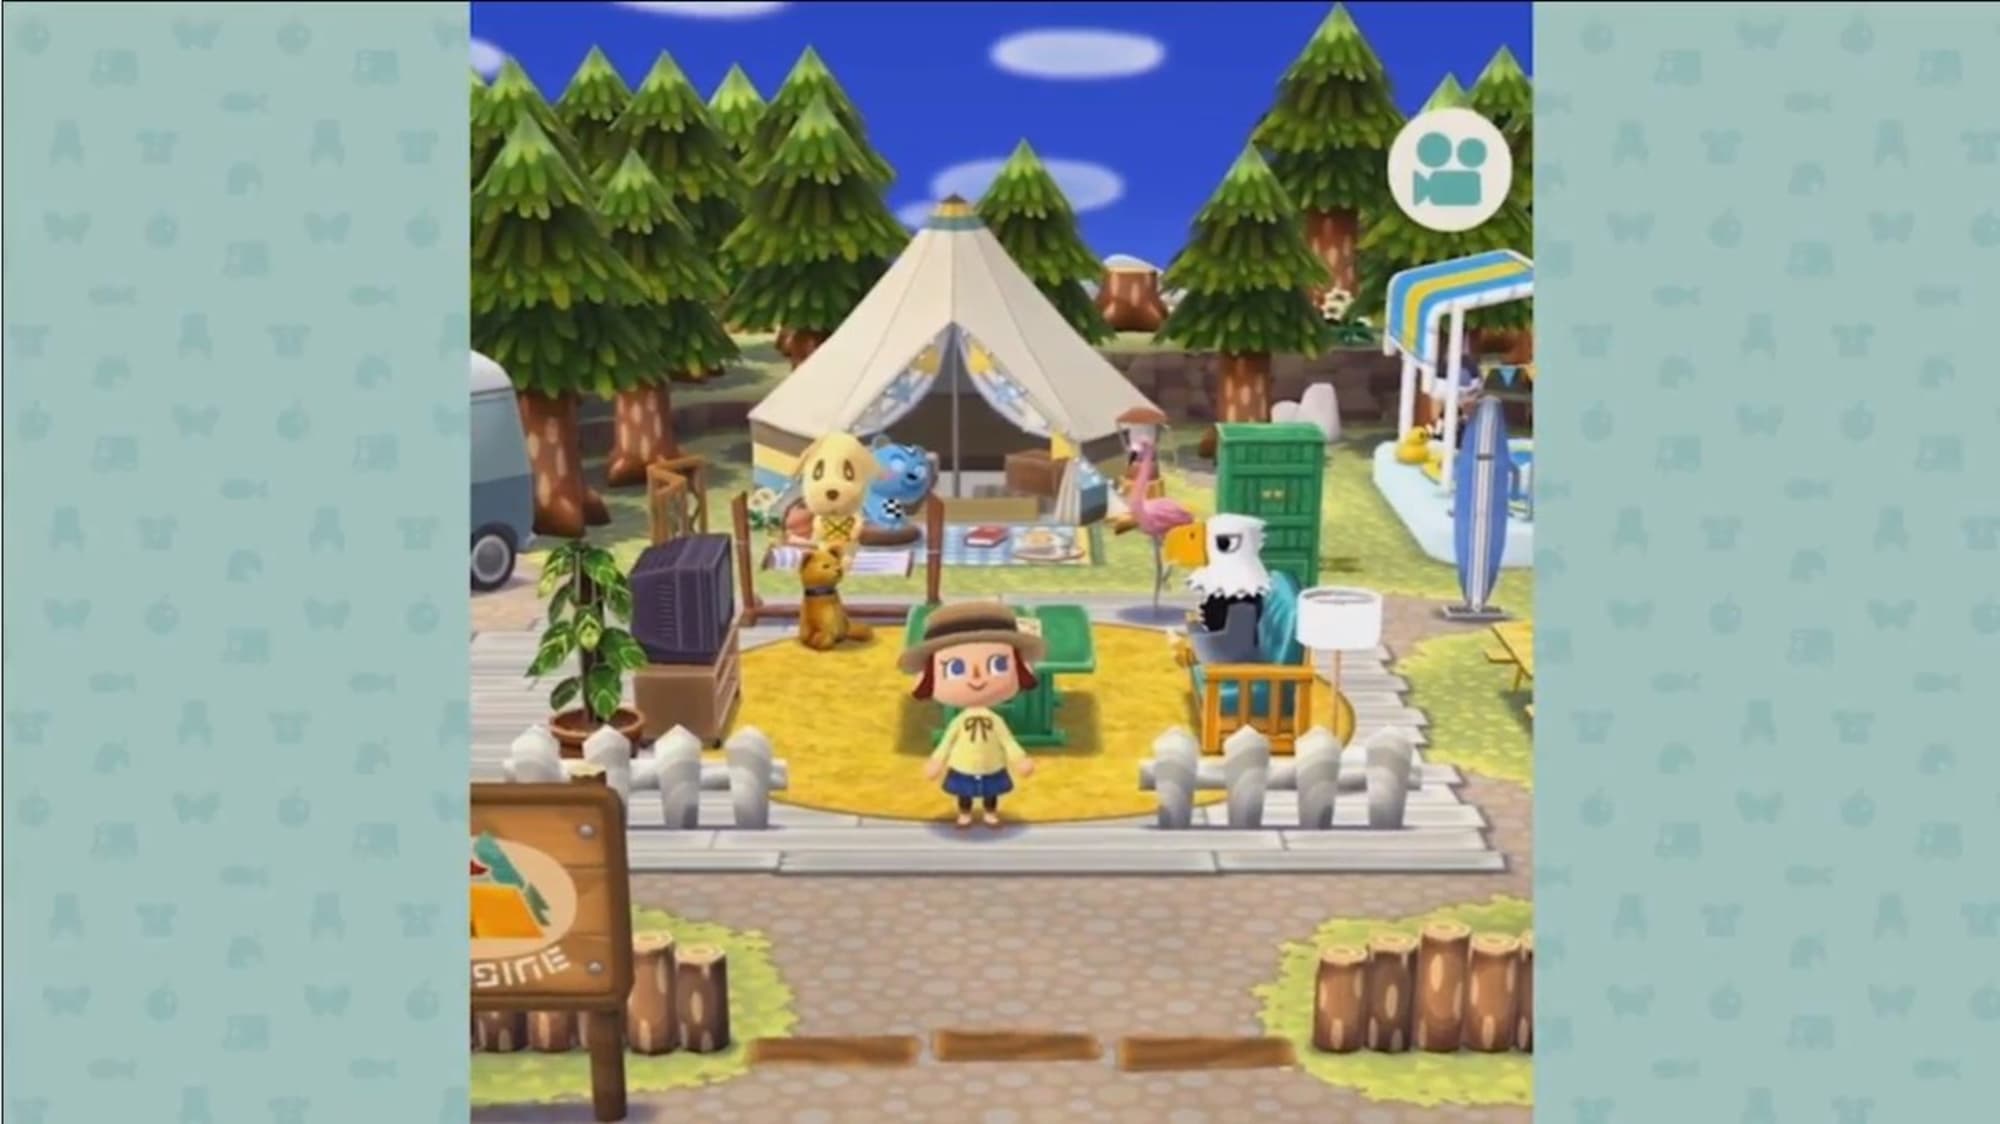 Animal Crossing Pocket Camp teases fans with wallpapers and quizzes